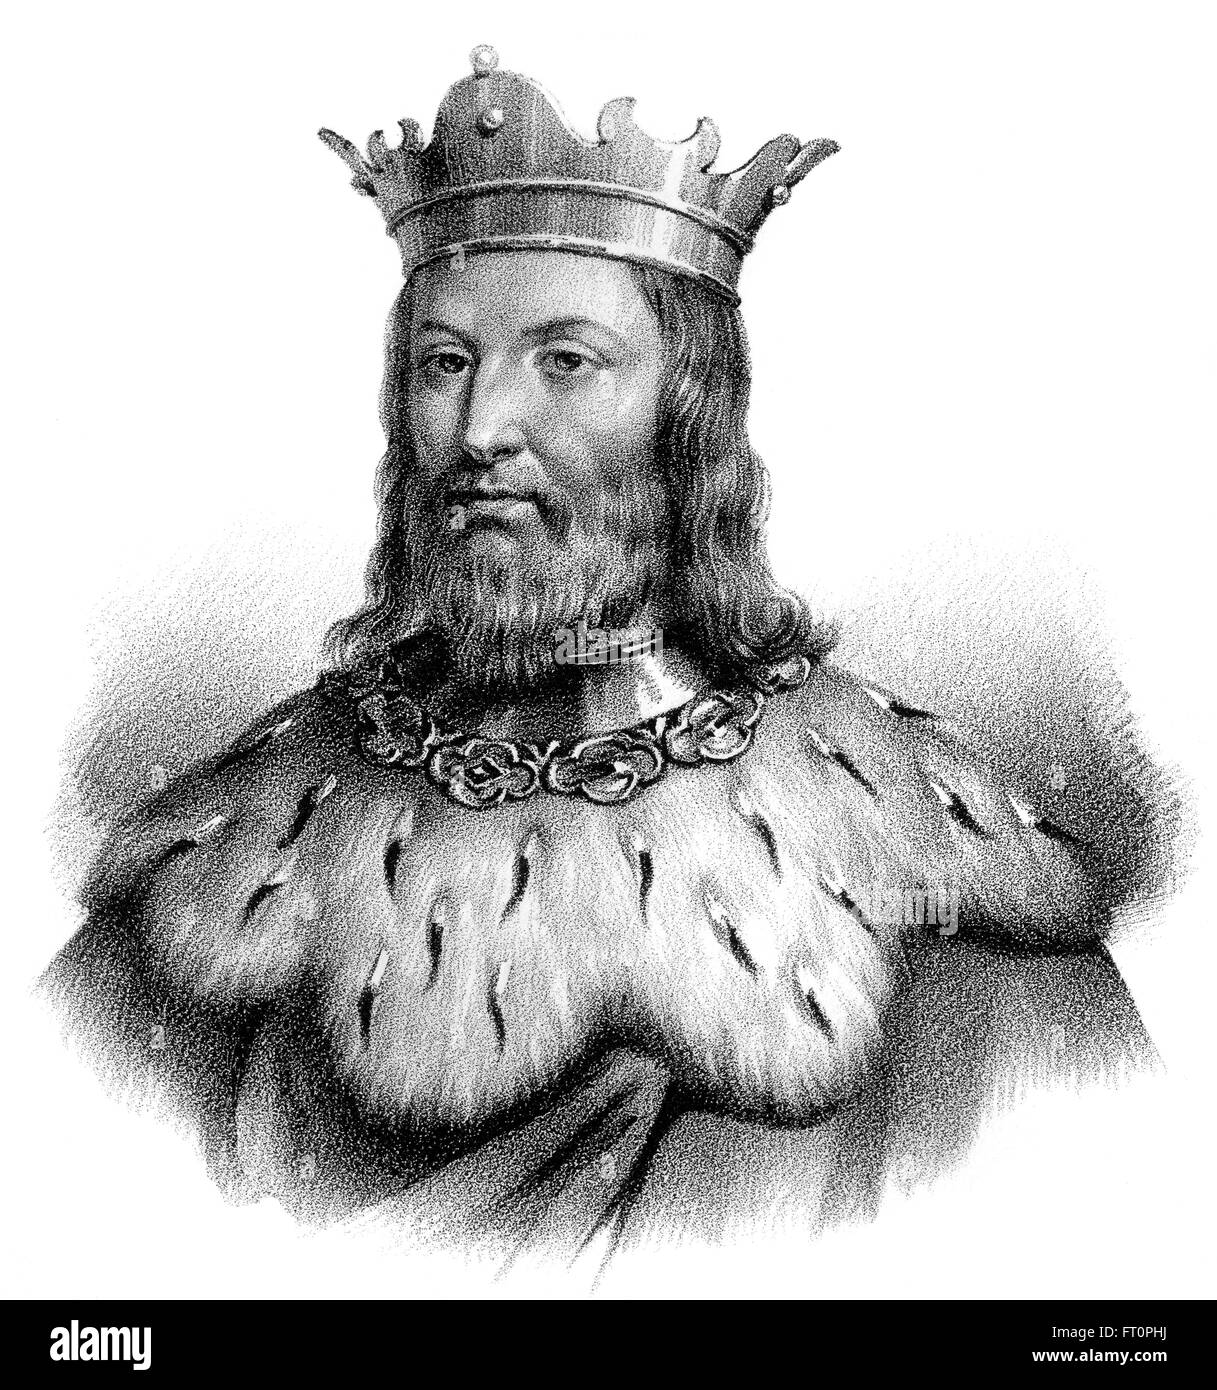 Clovis, Chlodovechus, Chlodwig I., Chlodowech,  466-511, King of the Franks of the Merovingian dynasty Stock Photo